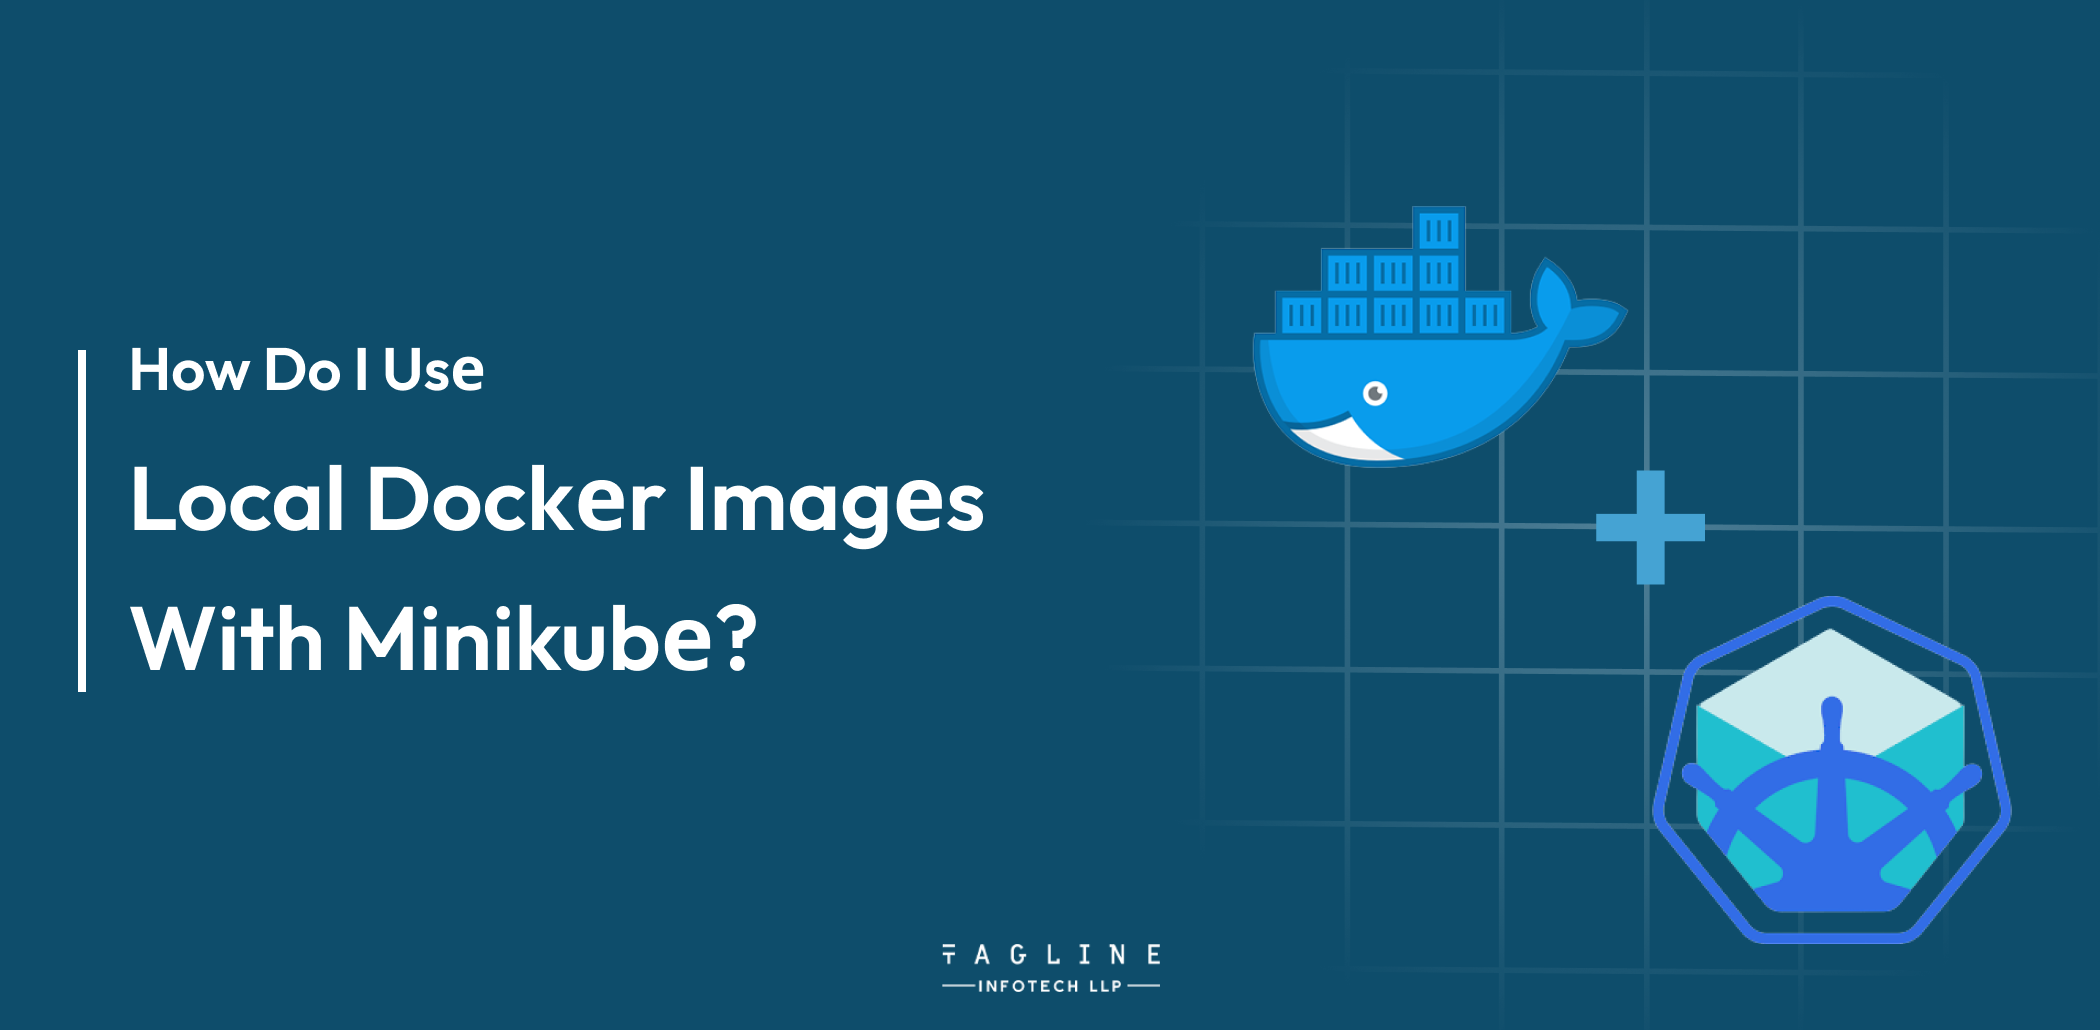 How do I use local Dockеr imagеs with Minikubе?